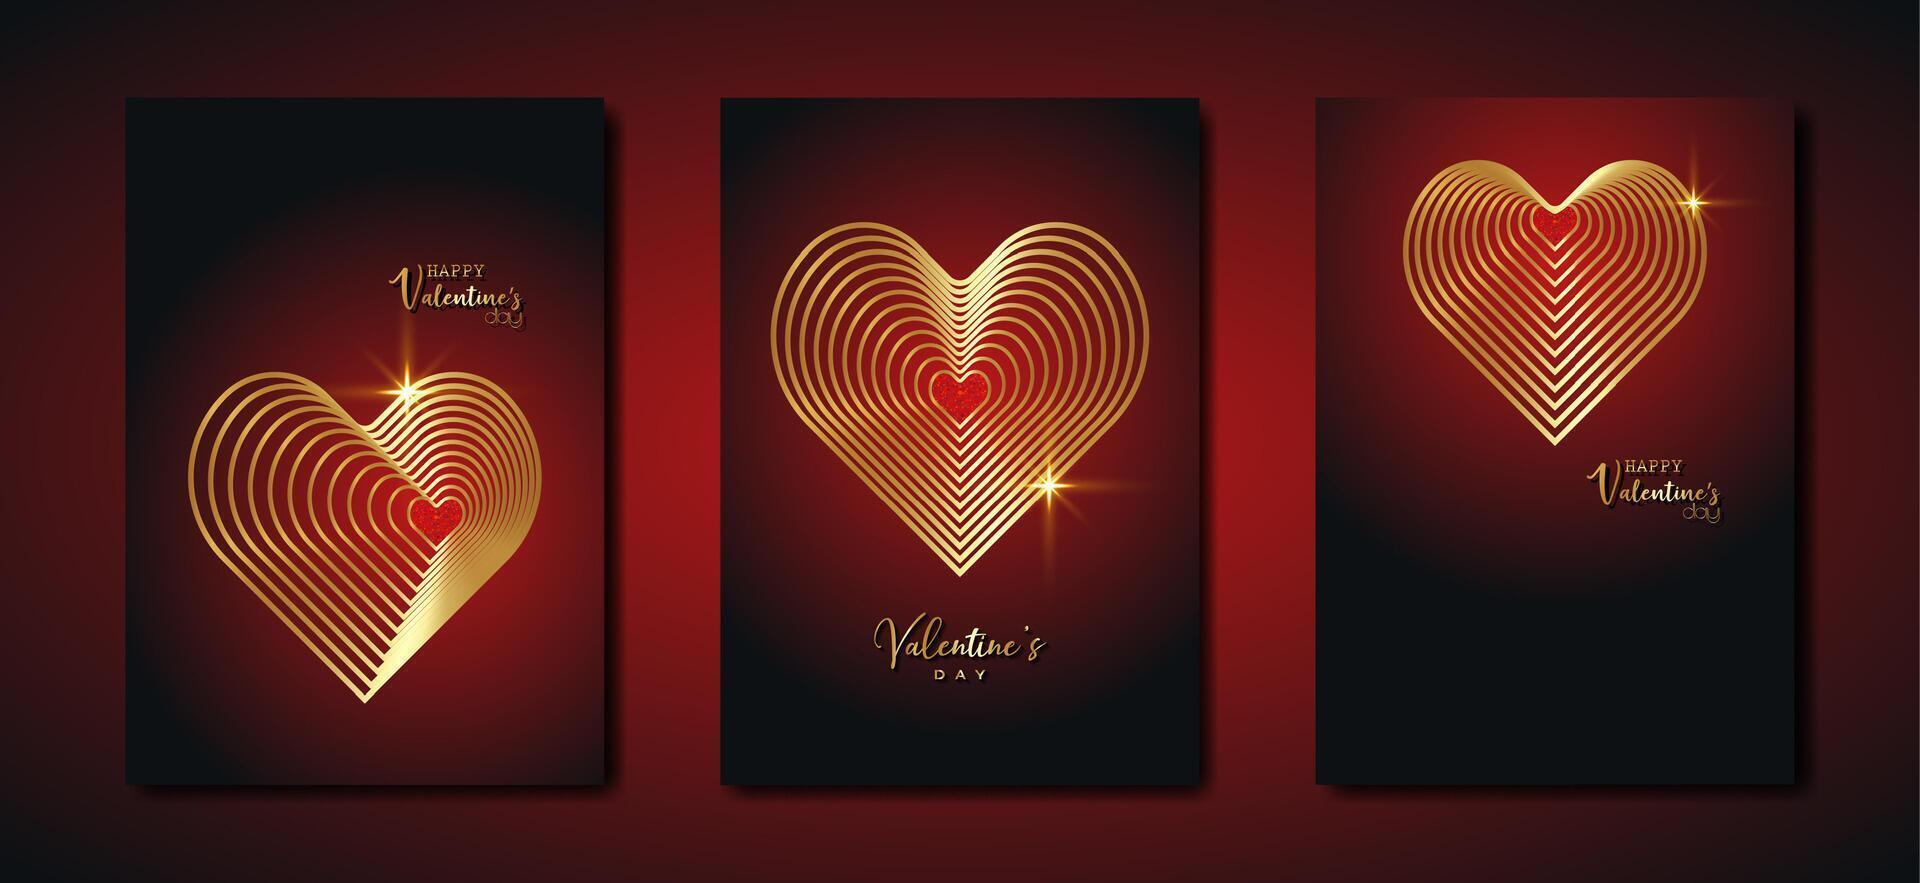 Happy Valentines day vector set greeting card. Gold hearts on dark red background. Holiday poster with gold text, jewels. Concept for Valentine banner, flyer, party invitation, jewelry gift shop